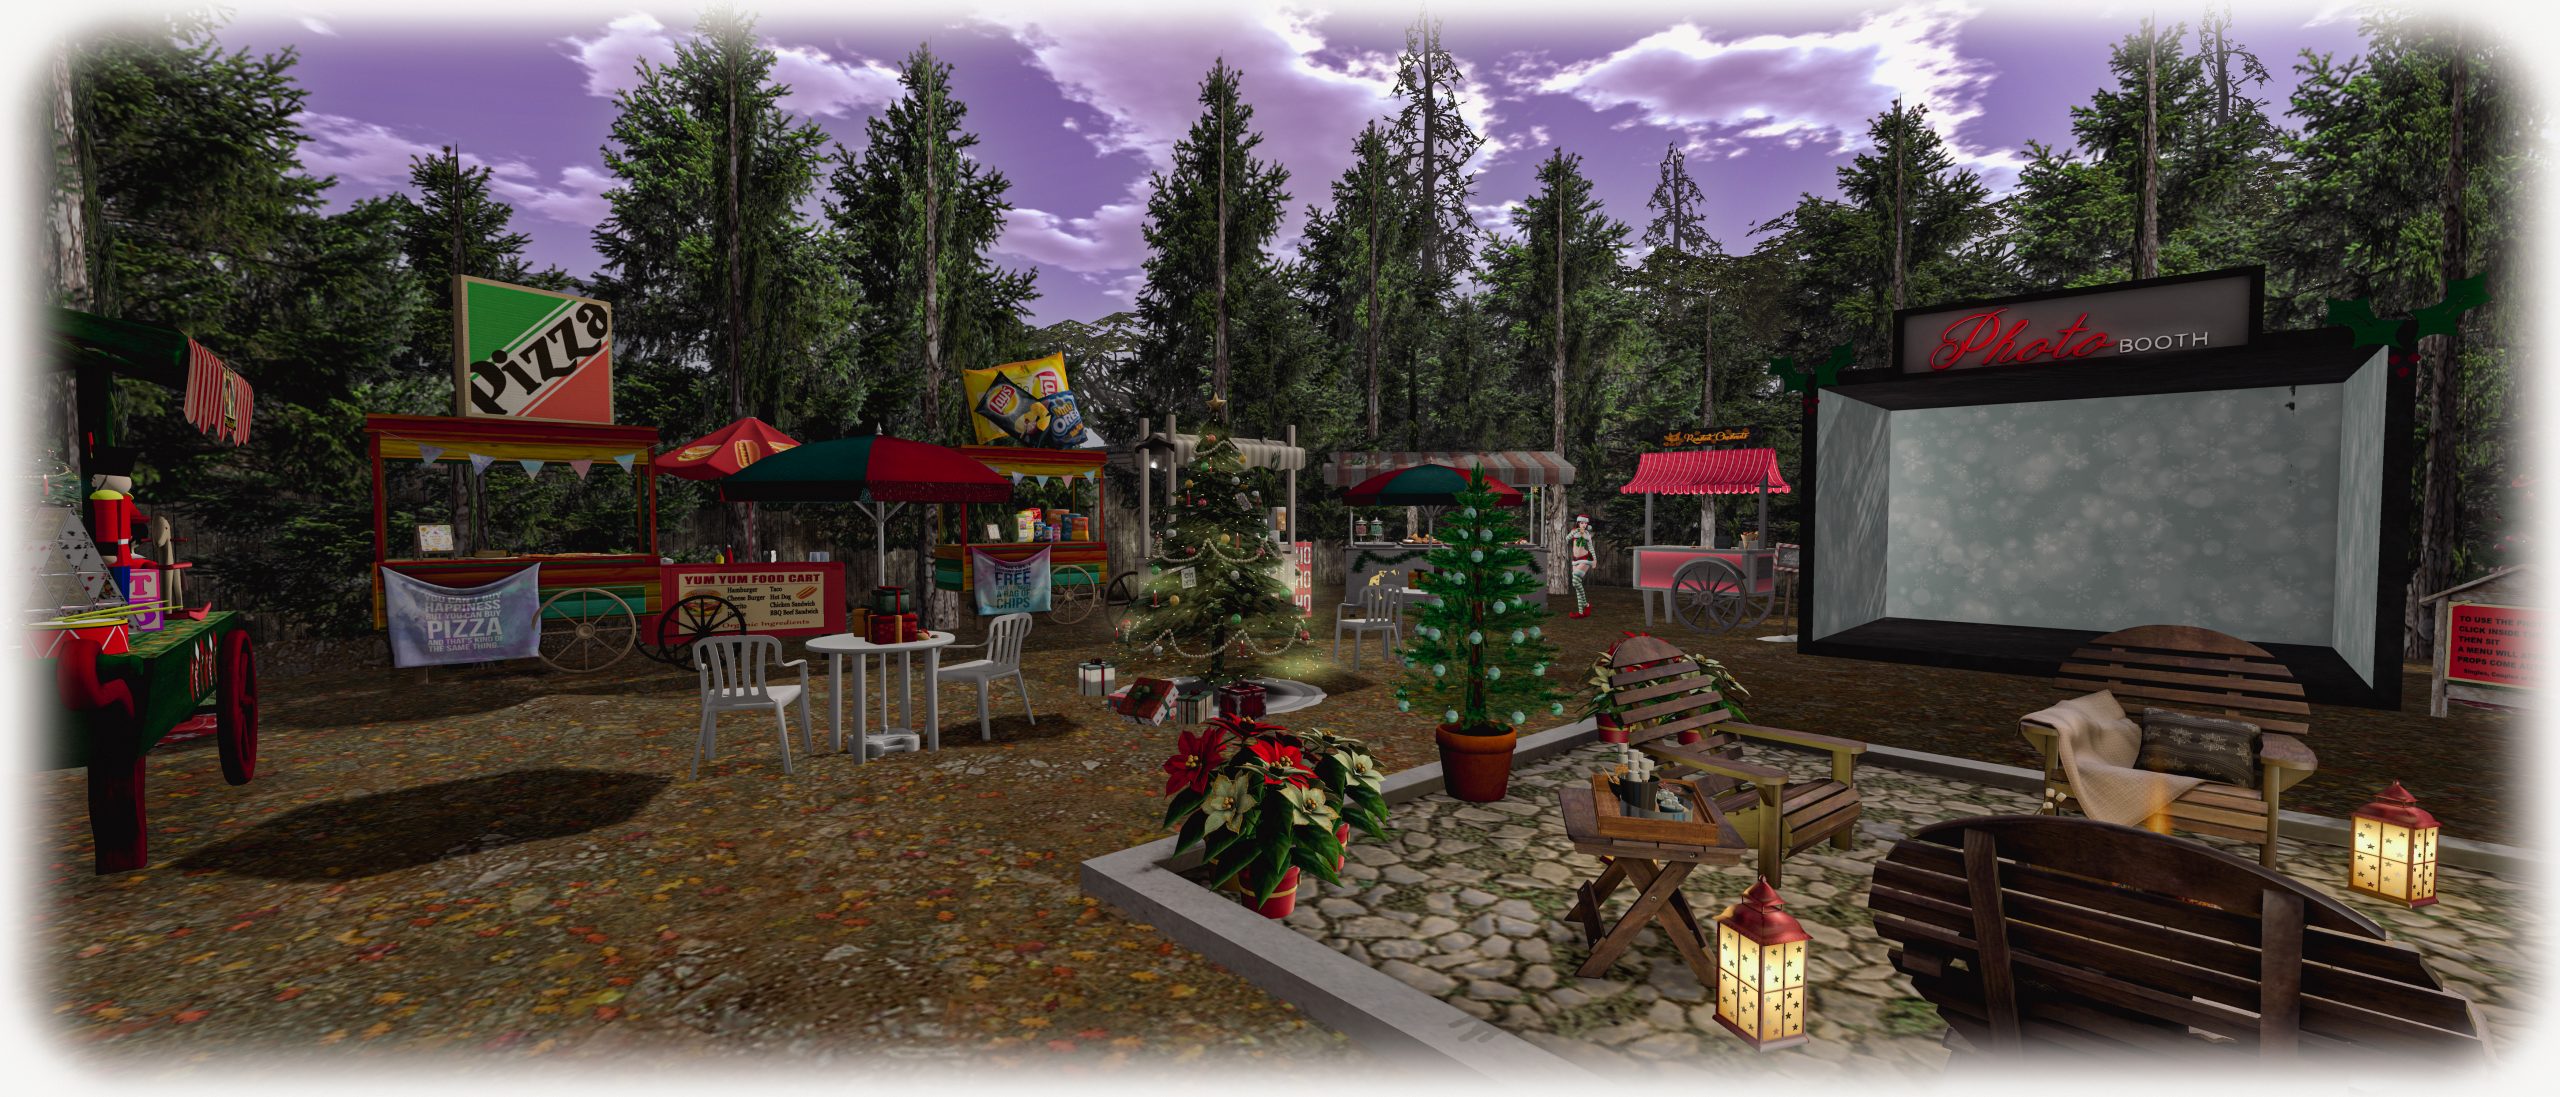 A picture of the Christmas Market